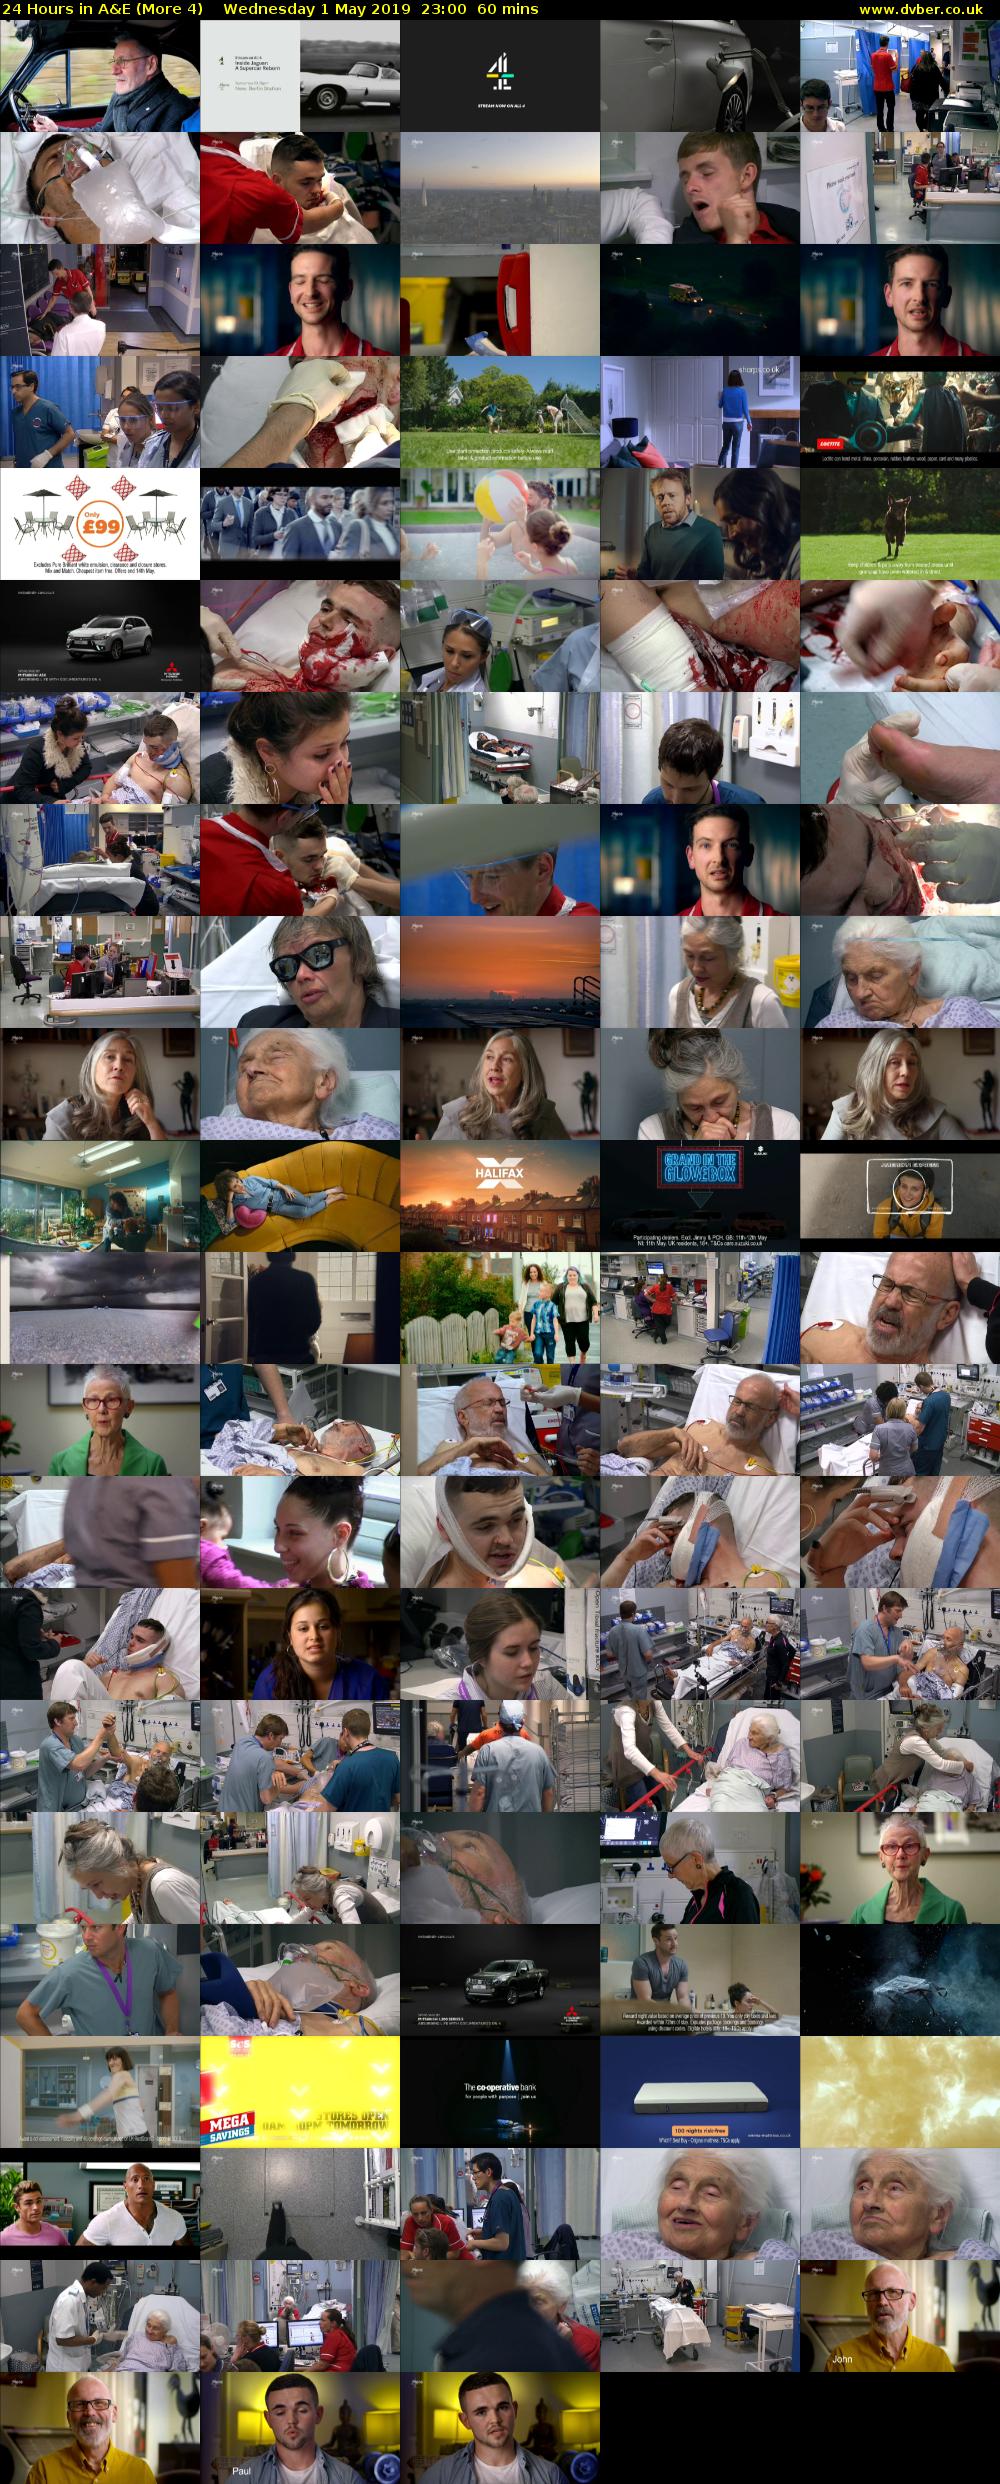 24 Hours in A&E (More 4) Wednesday 1 May 2019 23:00 - 00:00